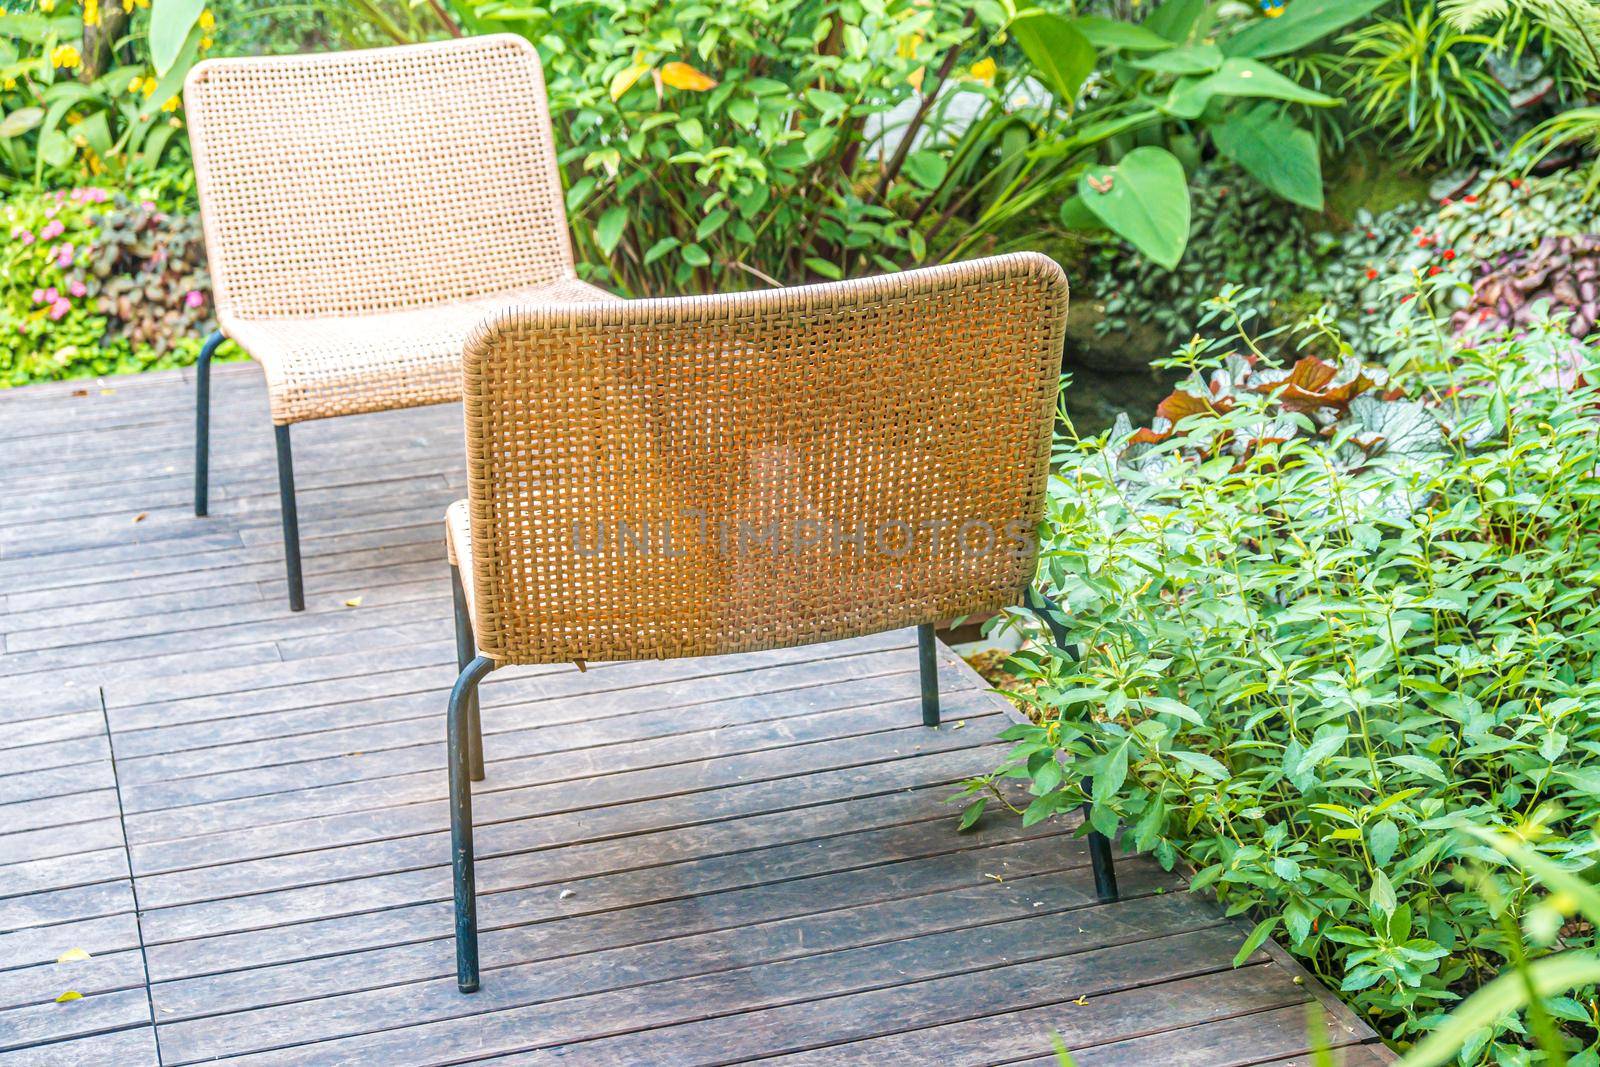 outdoor cream color woven chair decoration put on the wooden deck terrace in garden.